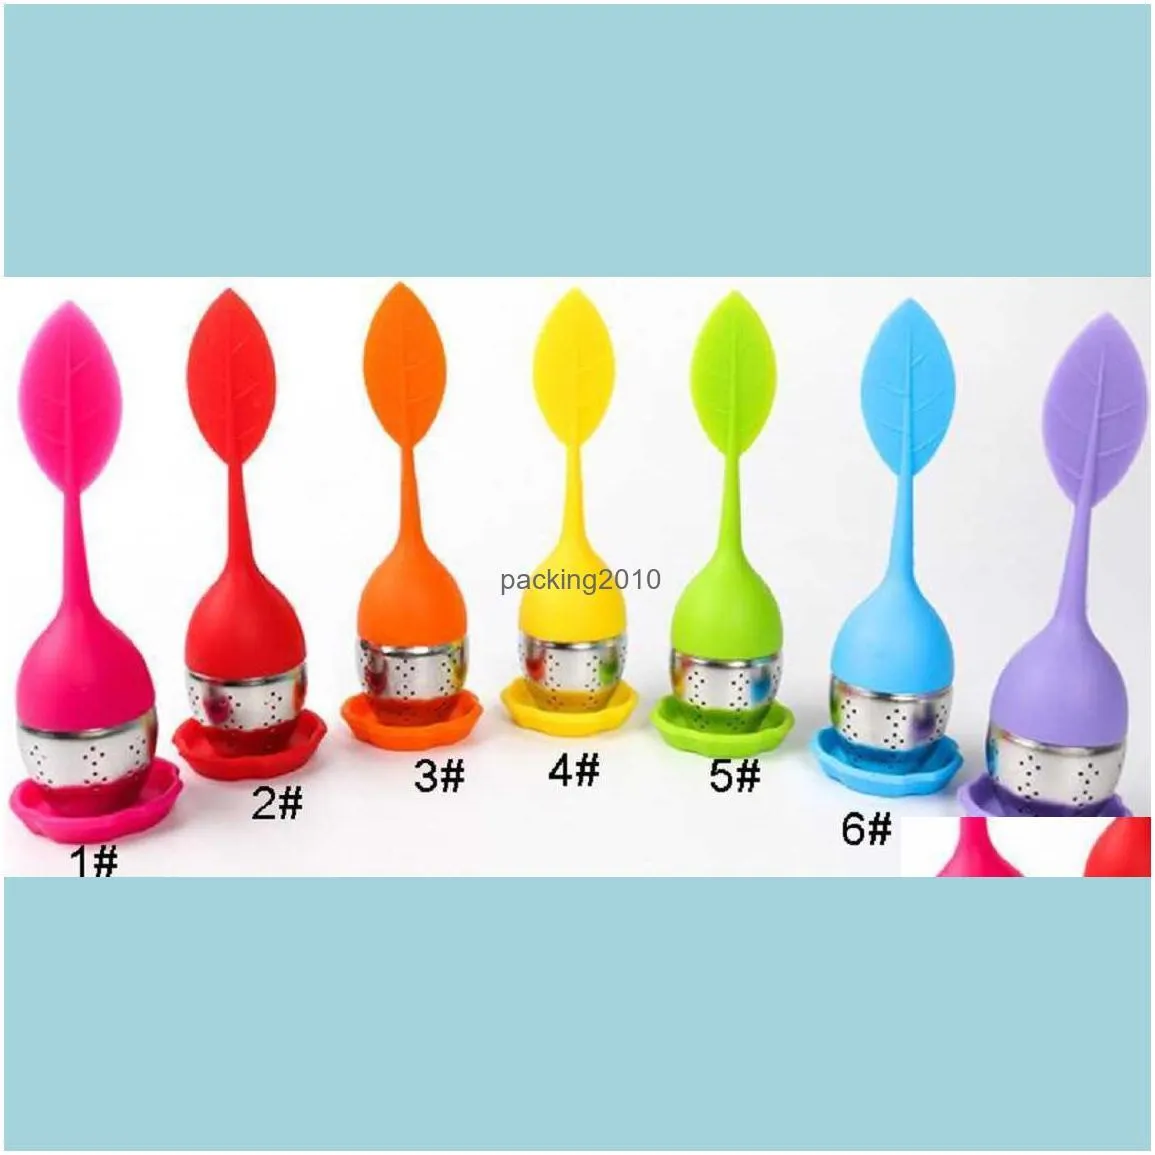 Silicone Tea Infuser Leaf Make Tea Bag Filter Strainer With Drop Tray Stainless Steel Tea Strainers Tea-things Kitchen Tools Home Use Cute Colorful